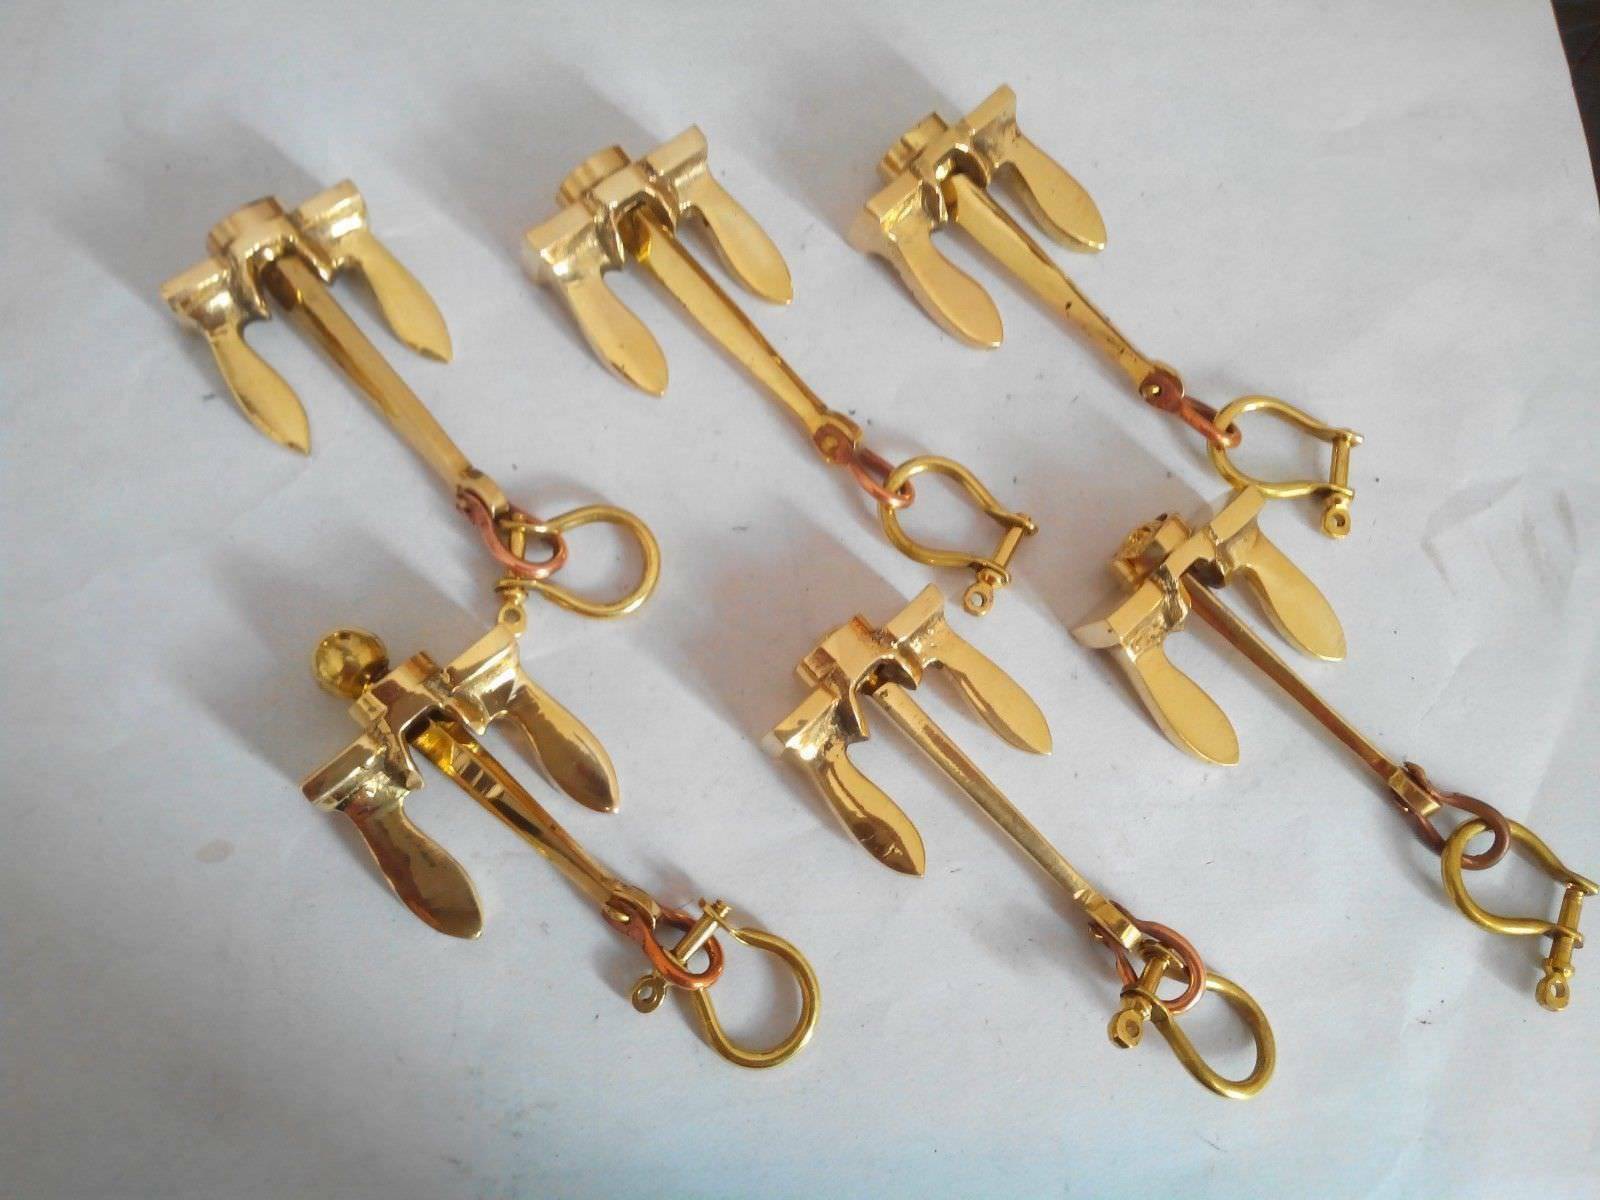 Lot of 5Brass Anchor Keychains Nautical handcuff keychain Style New year gifts Без бренда